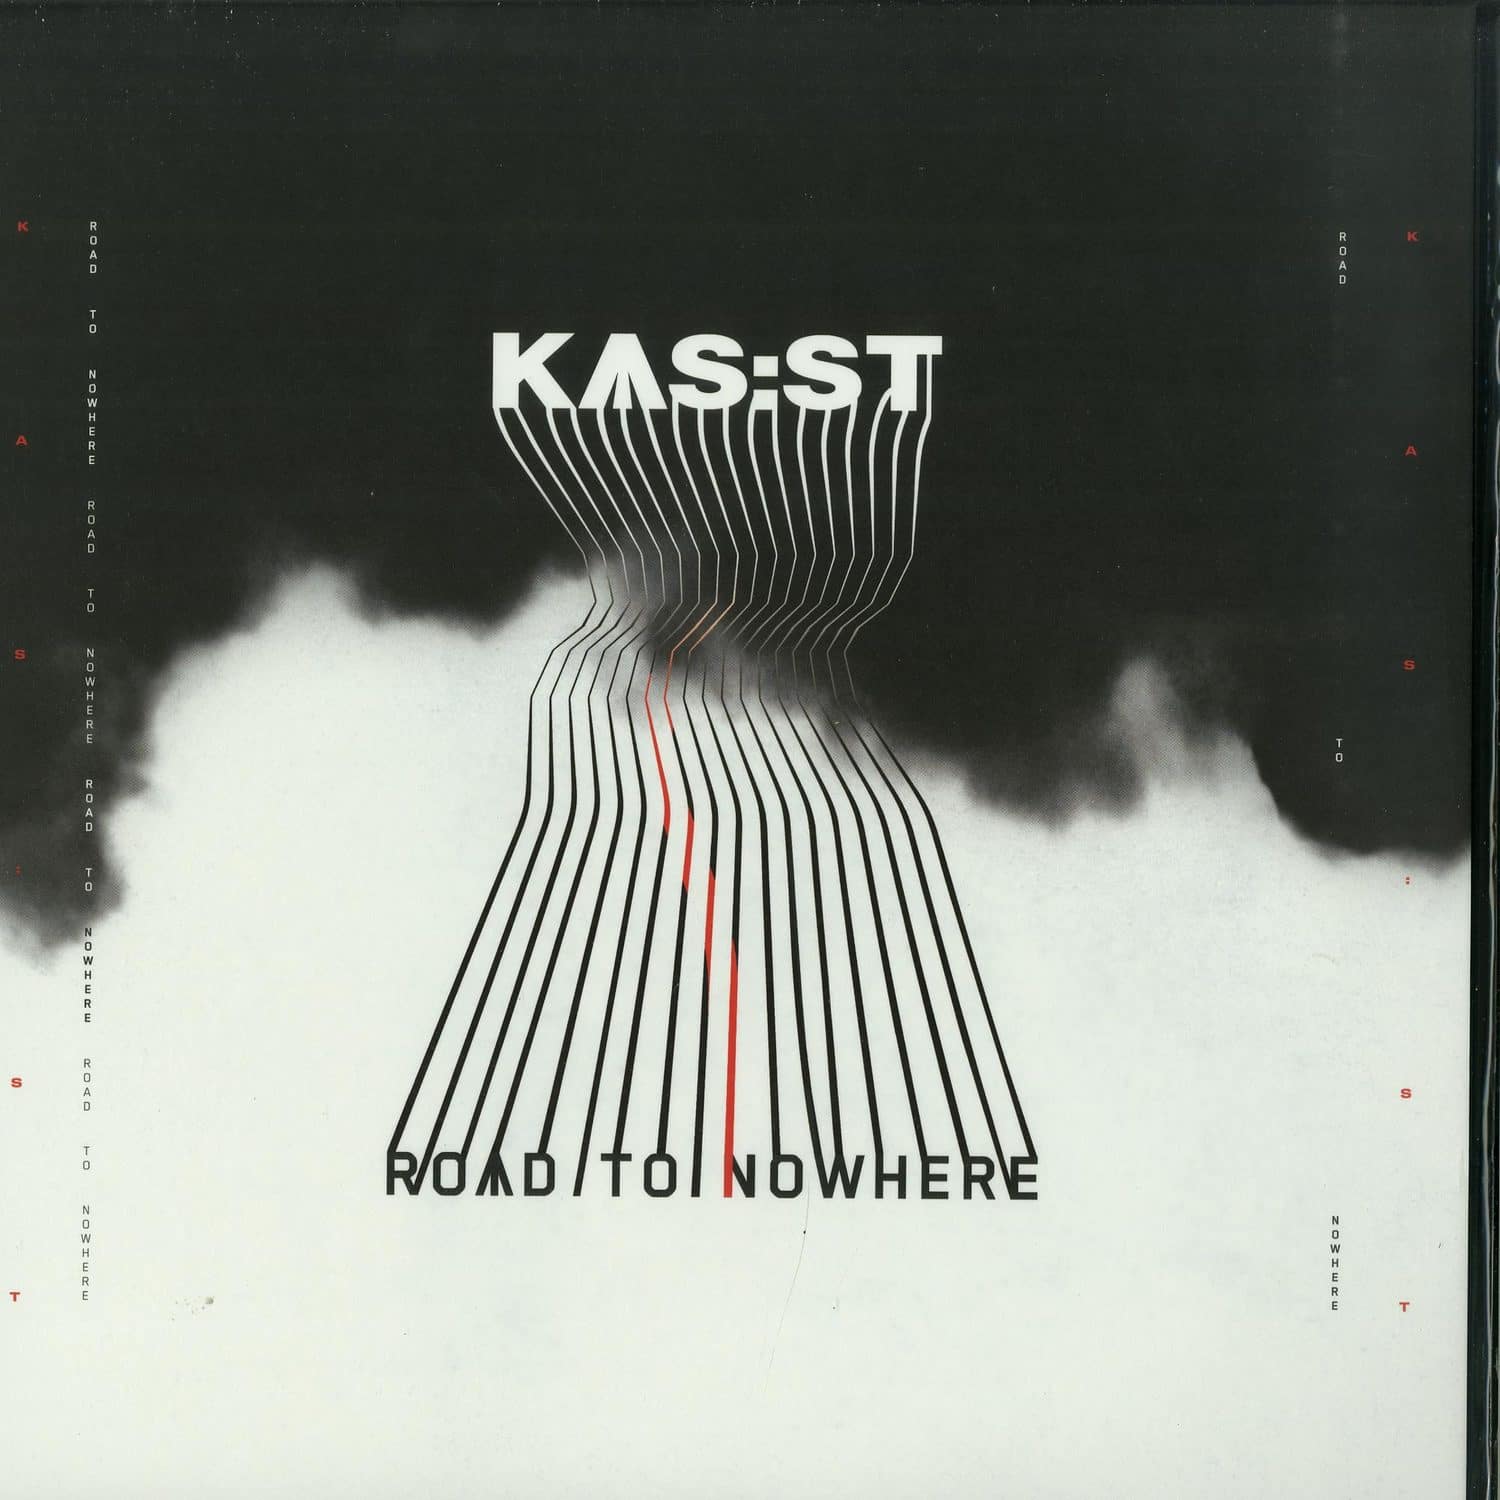 Kas:st - ROAD TO NOWHERE 